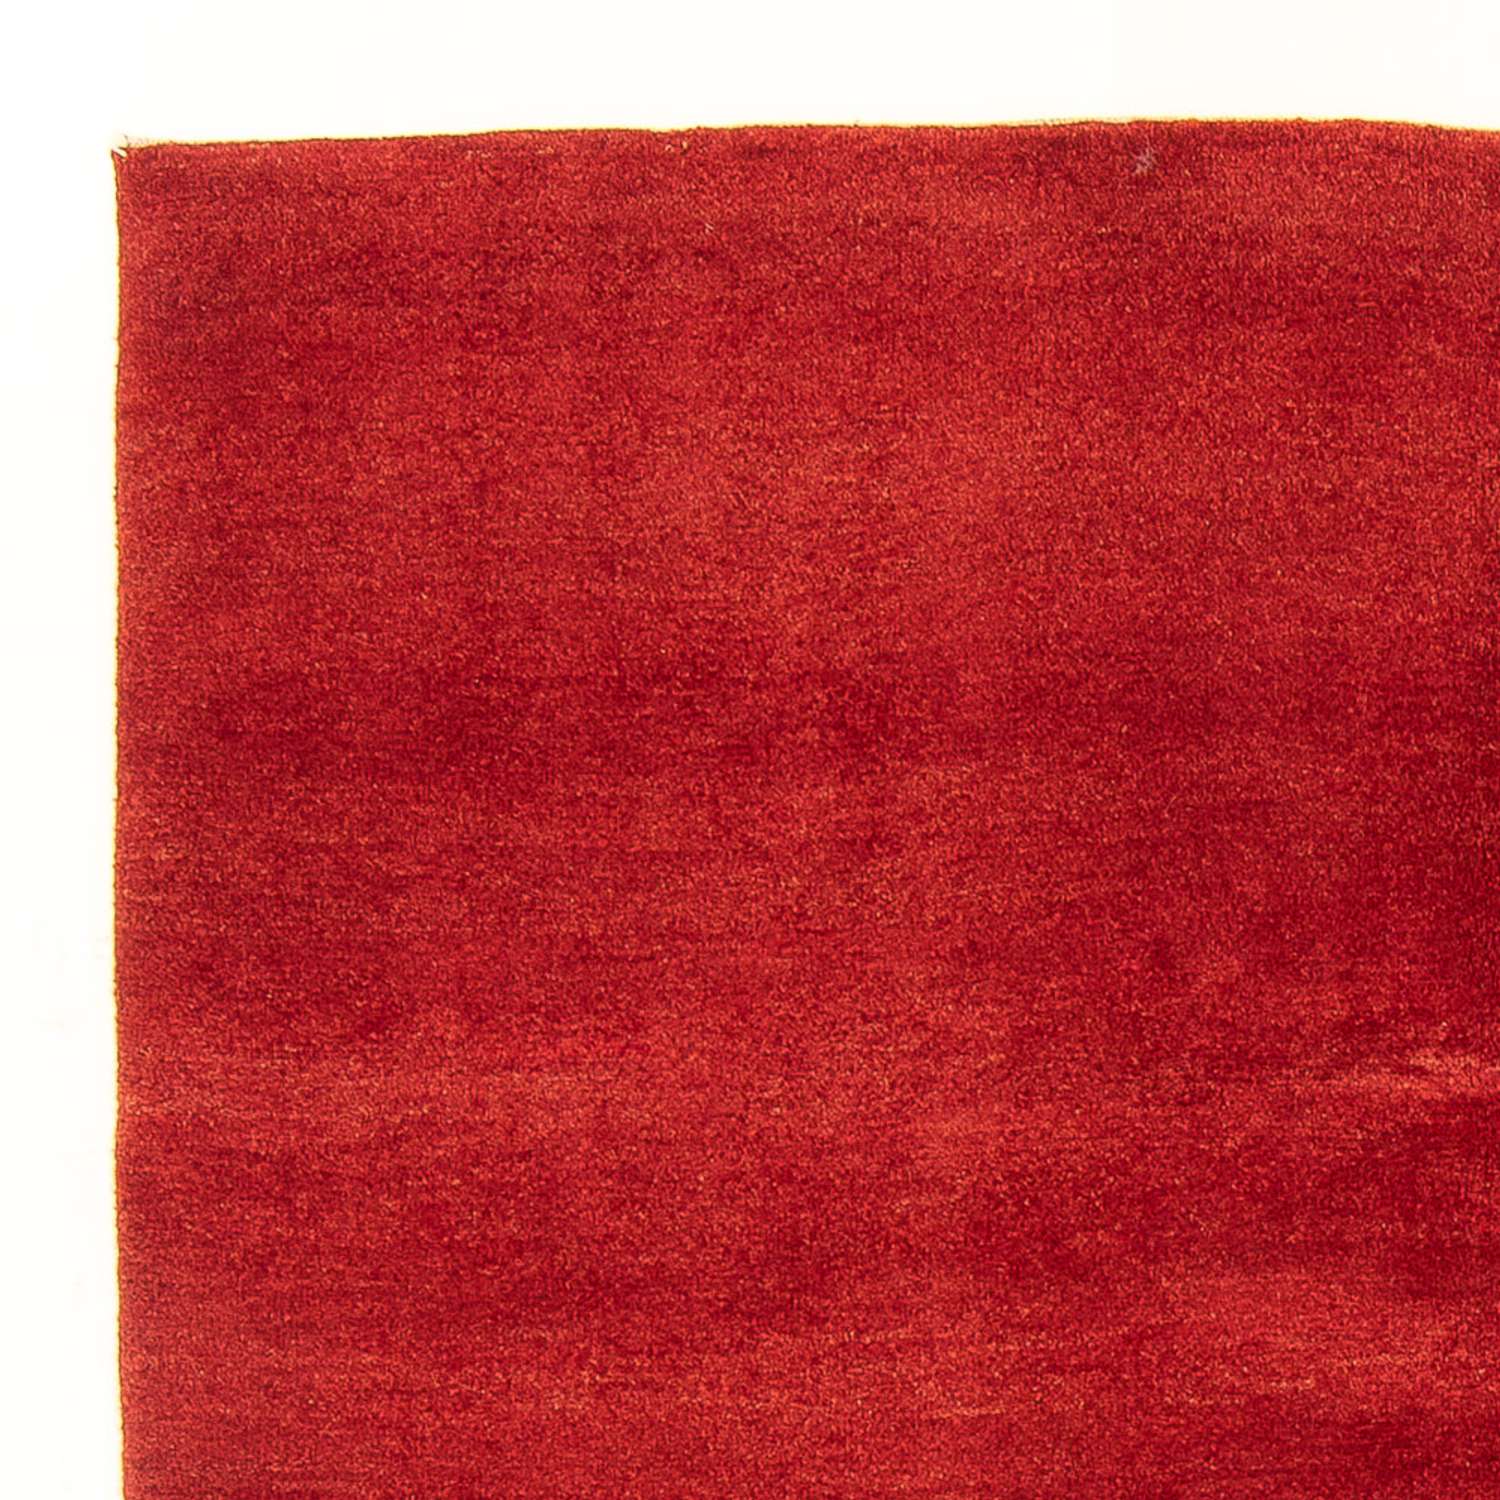 Gabbeh Rug - Perser square  - 168 x 168 cm - red